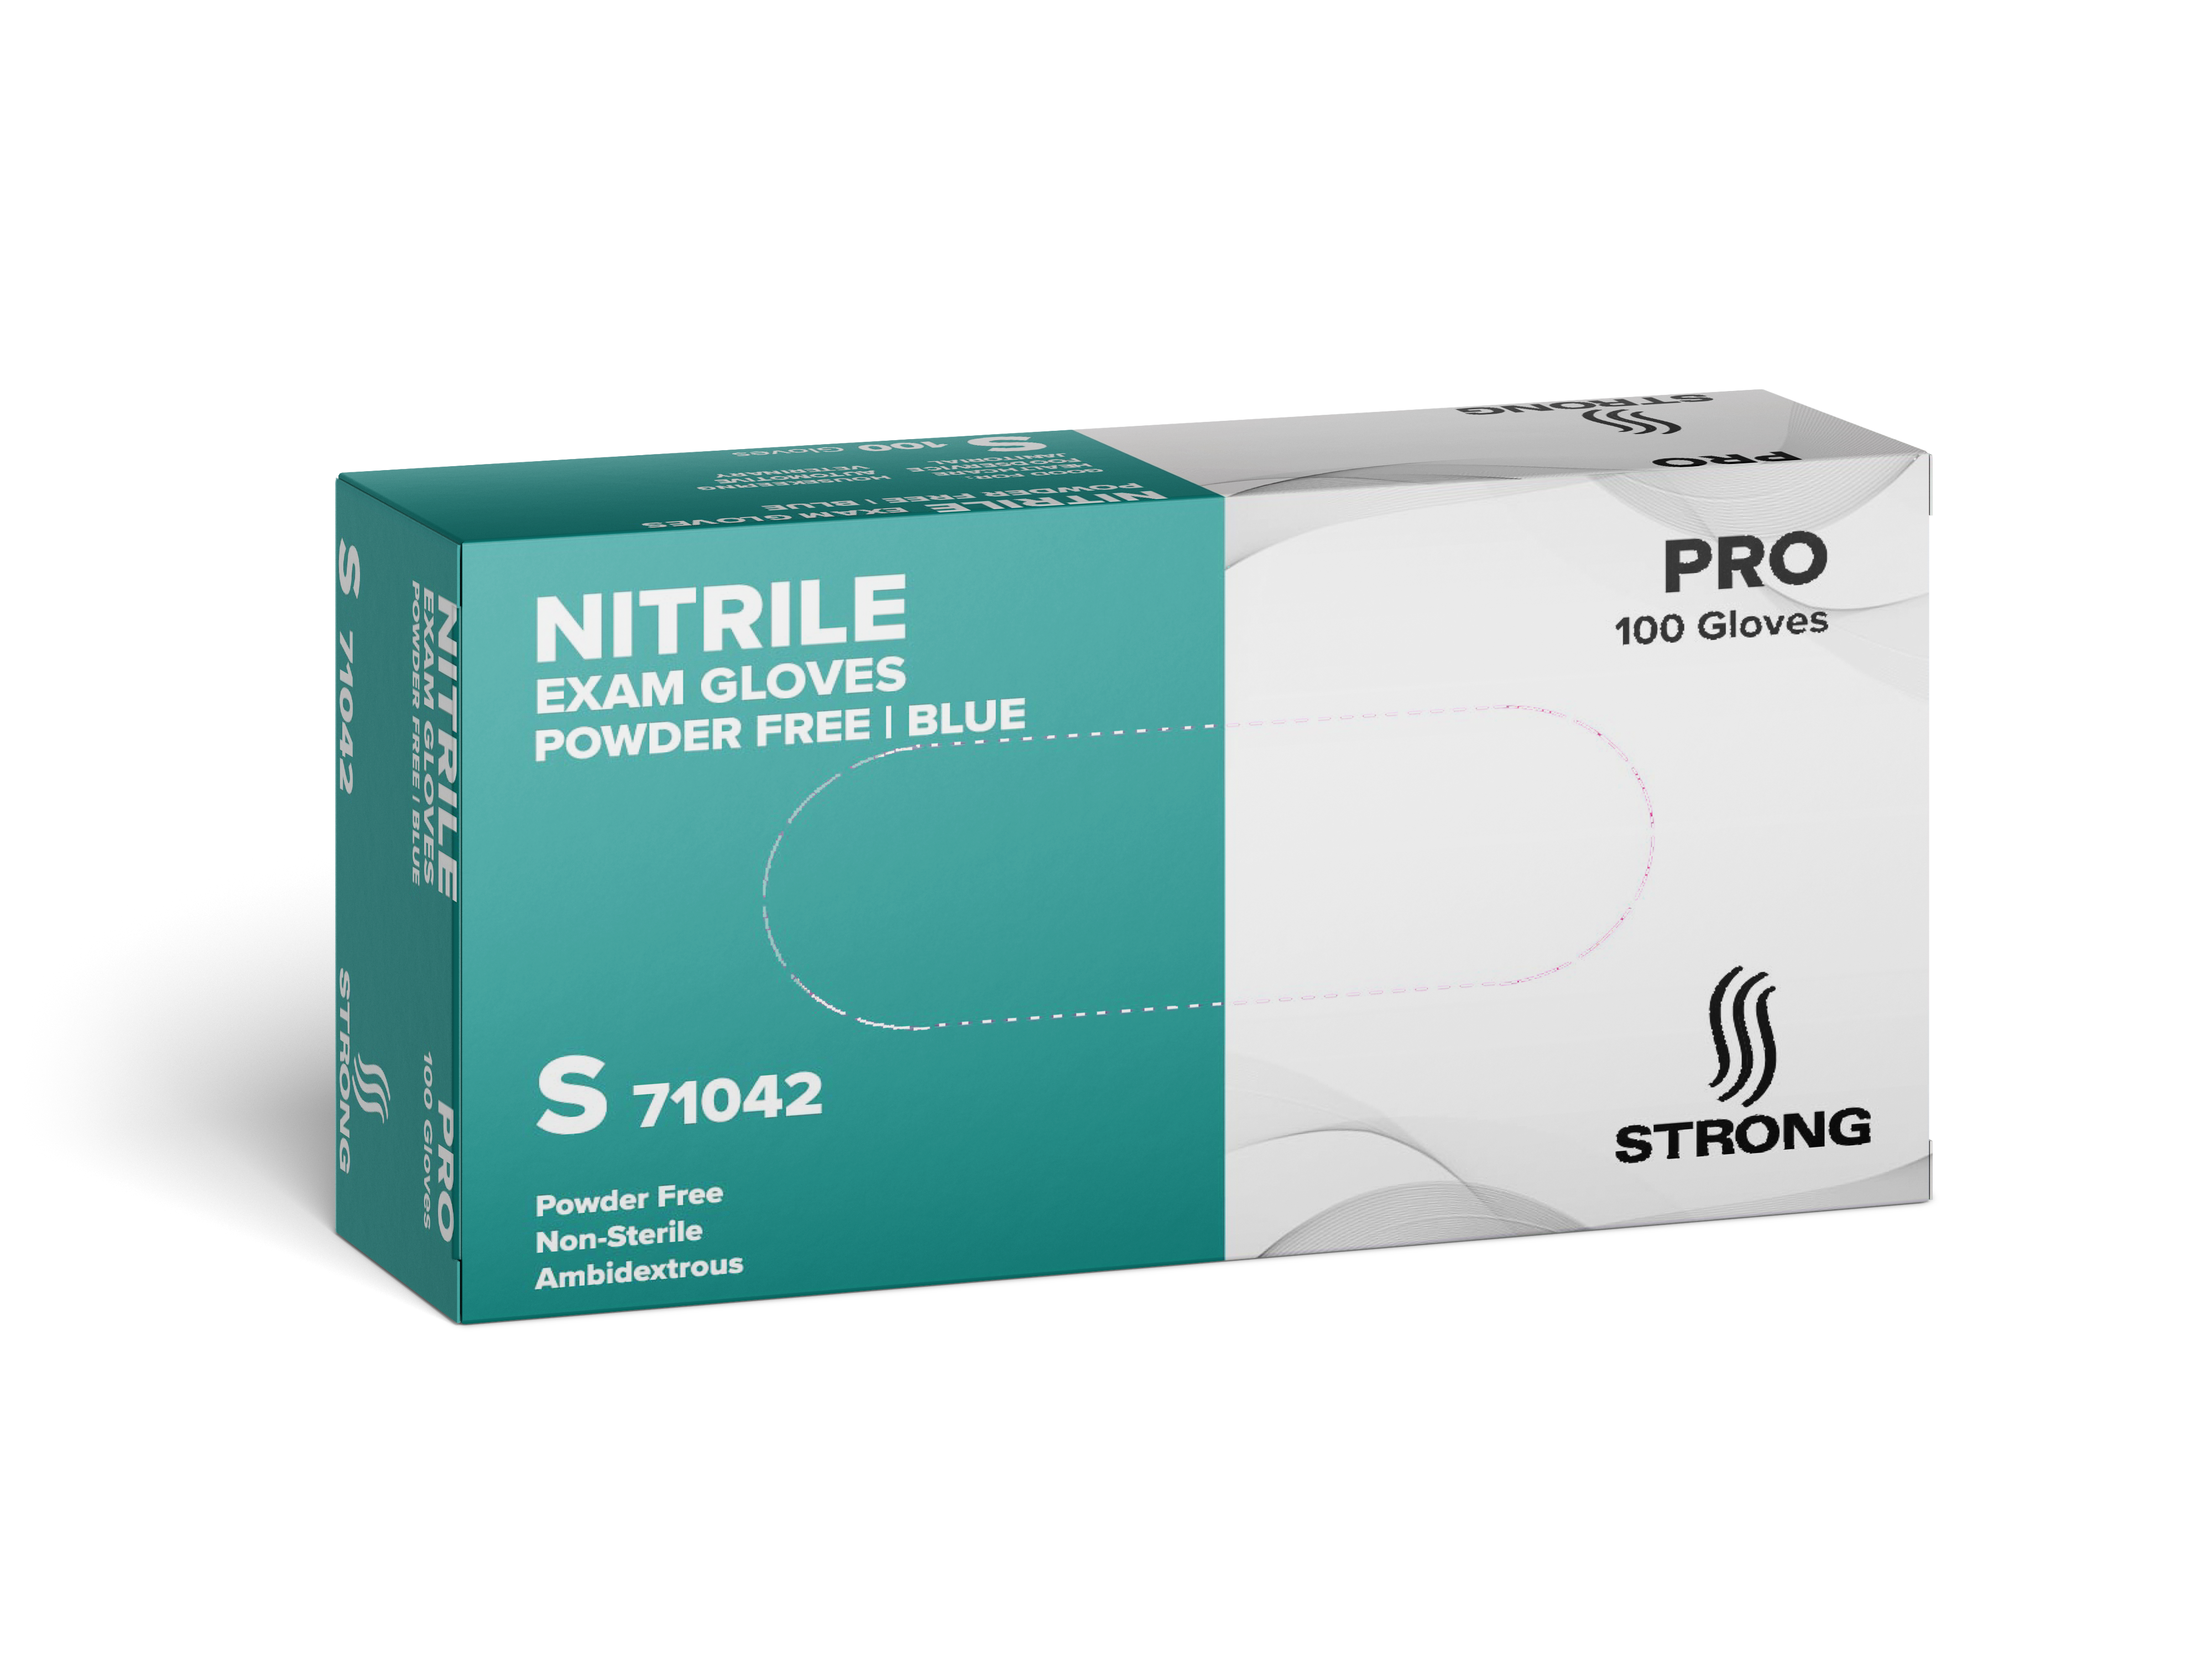 STRONG Nitrile Exam Gloves - 200 Per Box - Powder Free – STRONG  Manufacturers